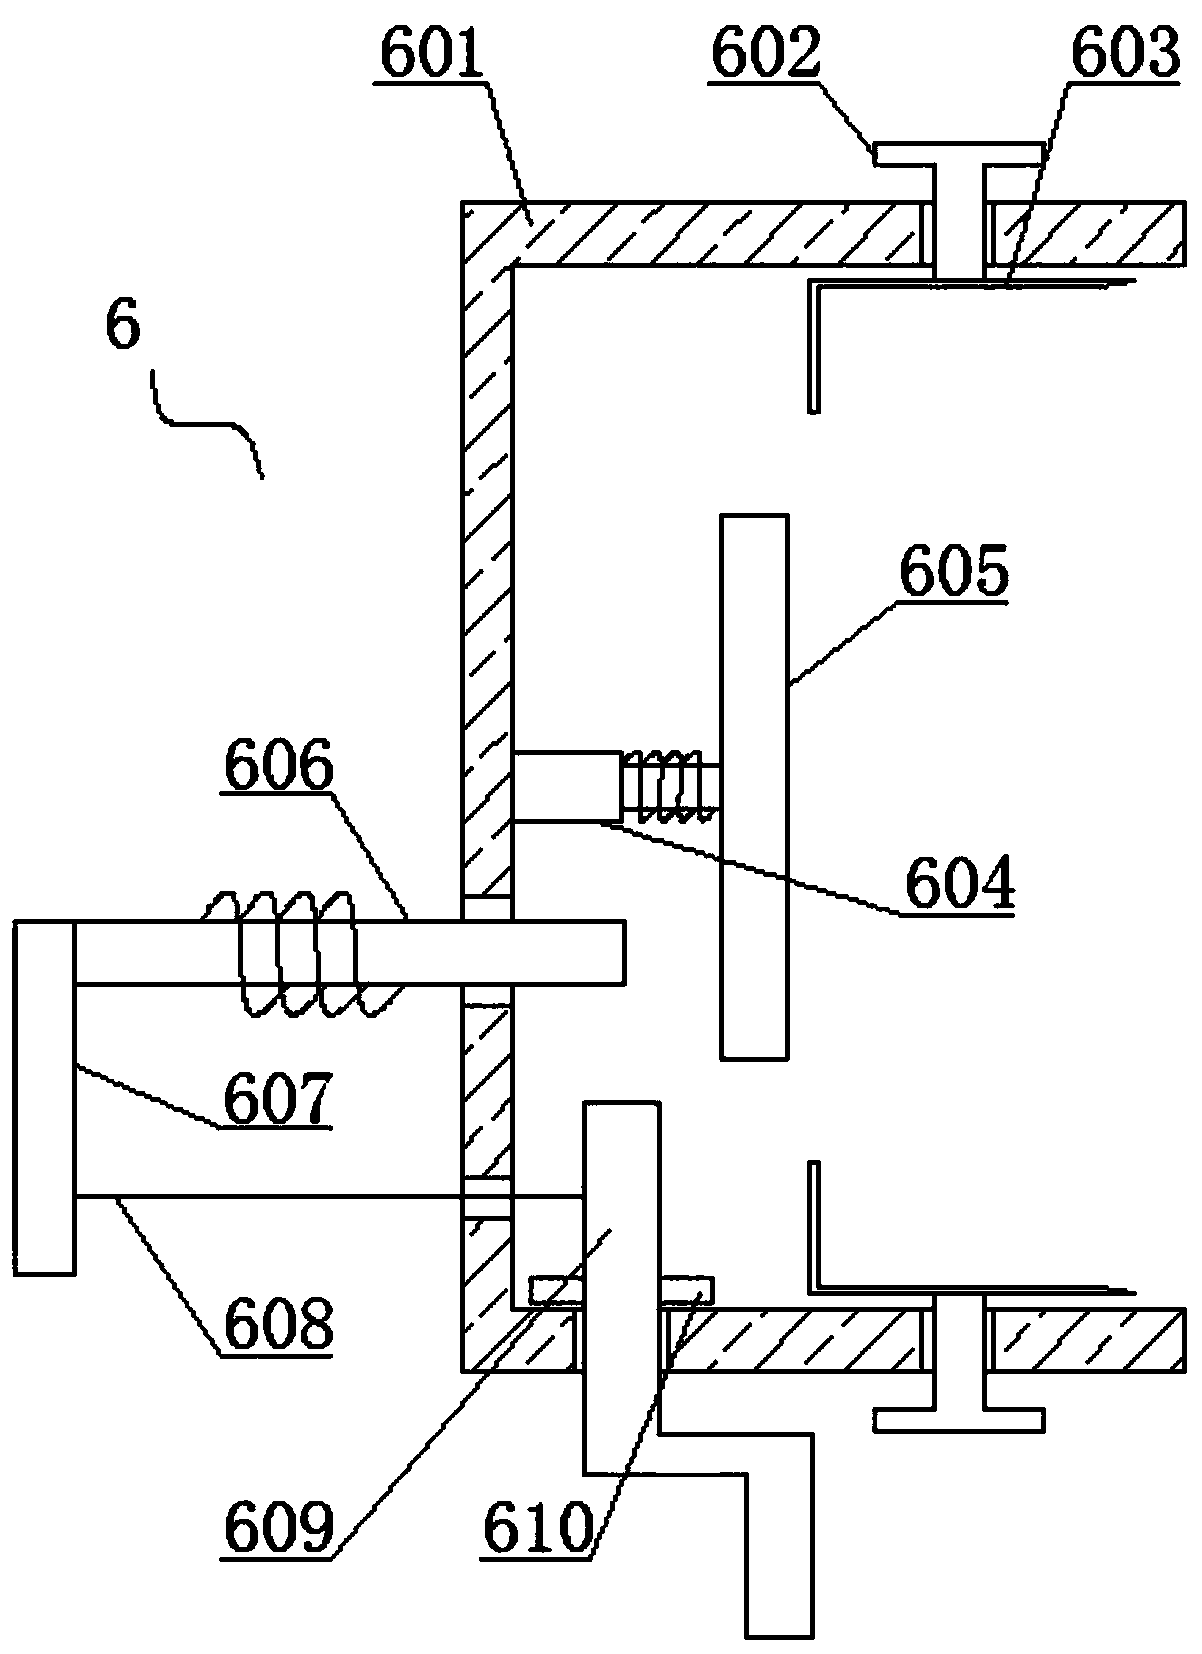 Mobile device for high-altitude object installation